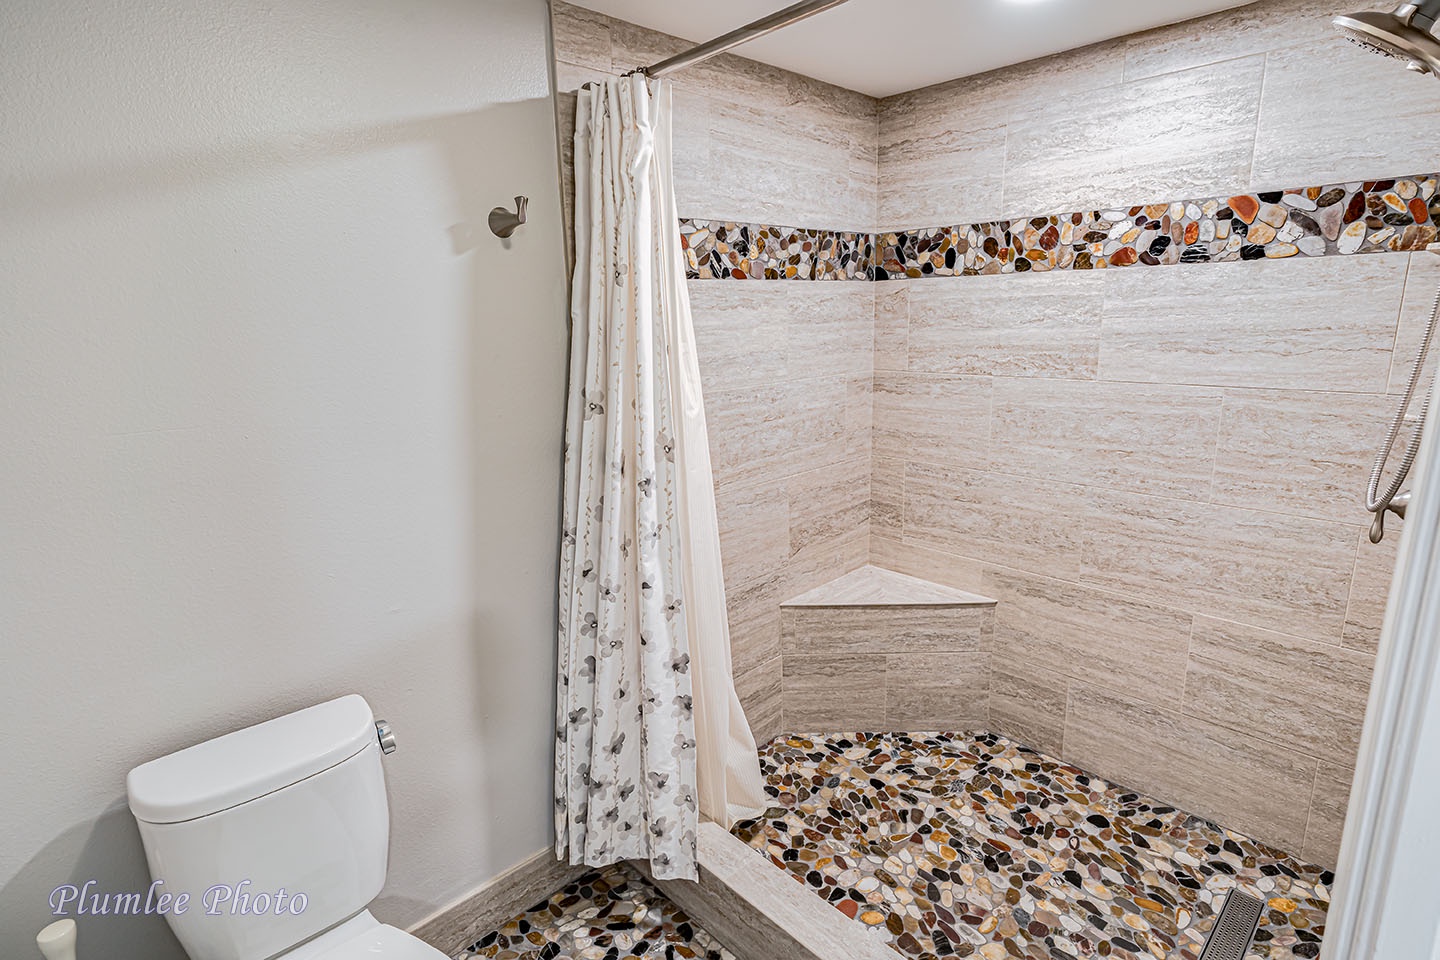 Very cool stone tile flooring in shower.